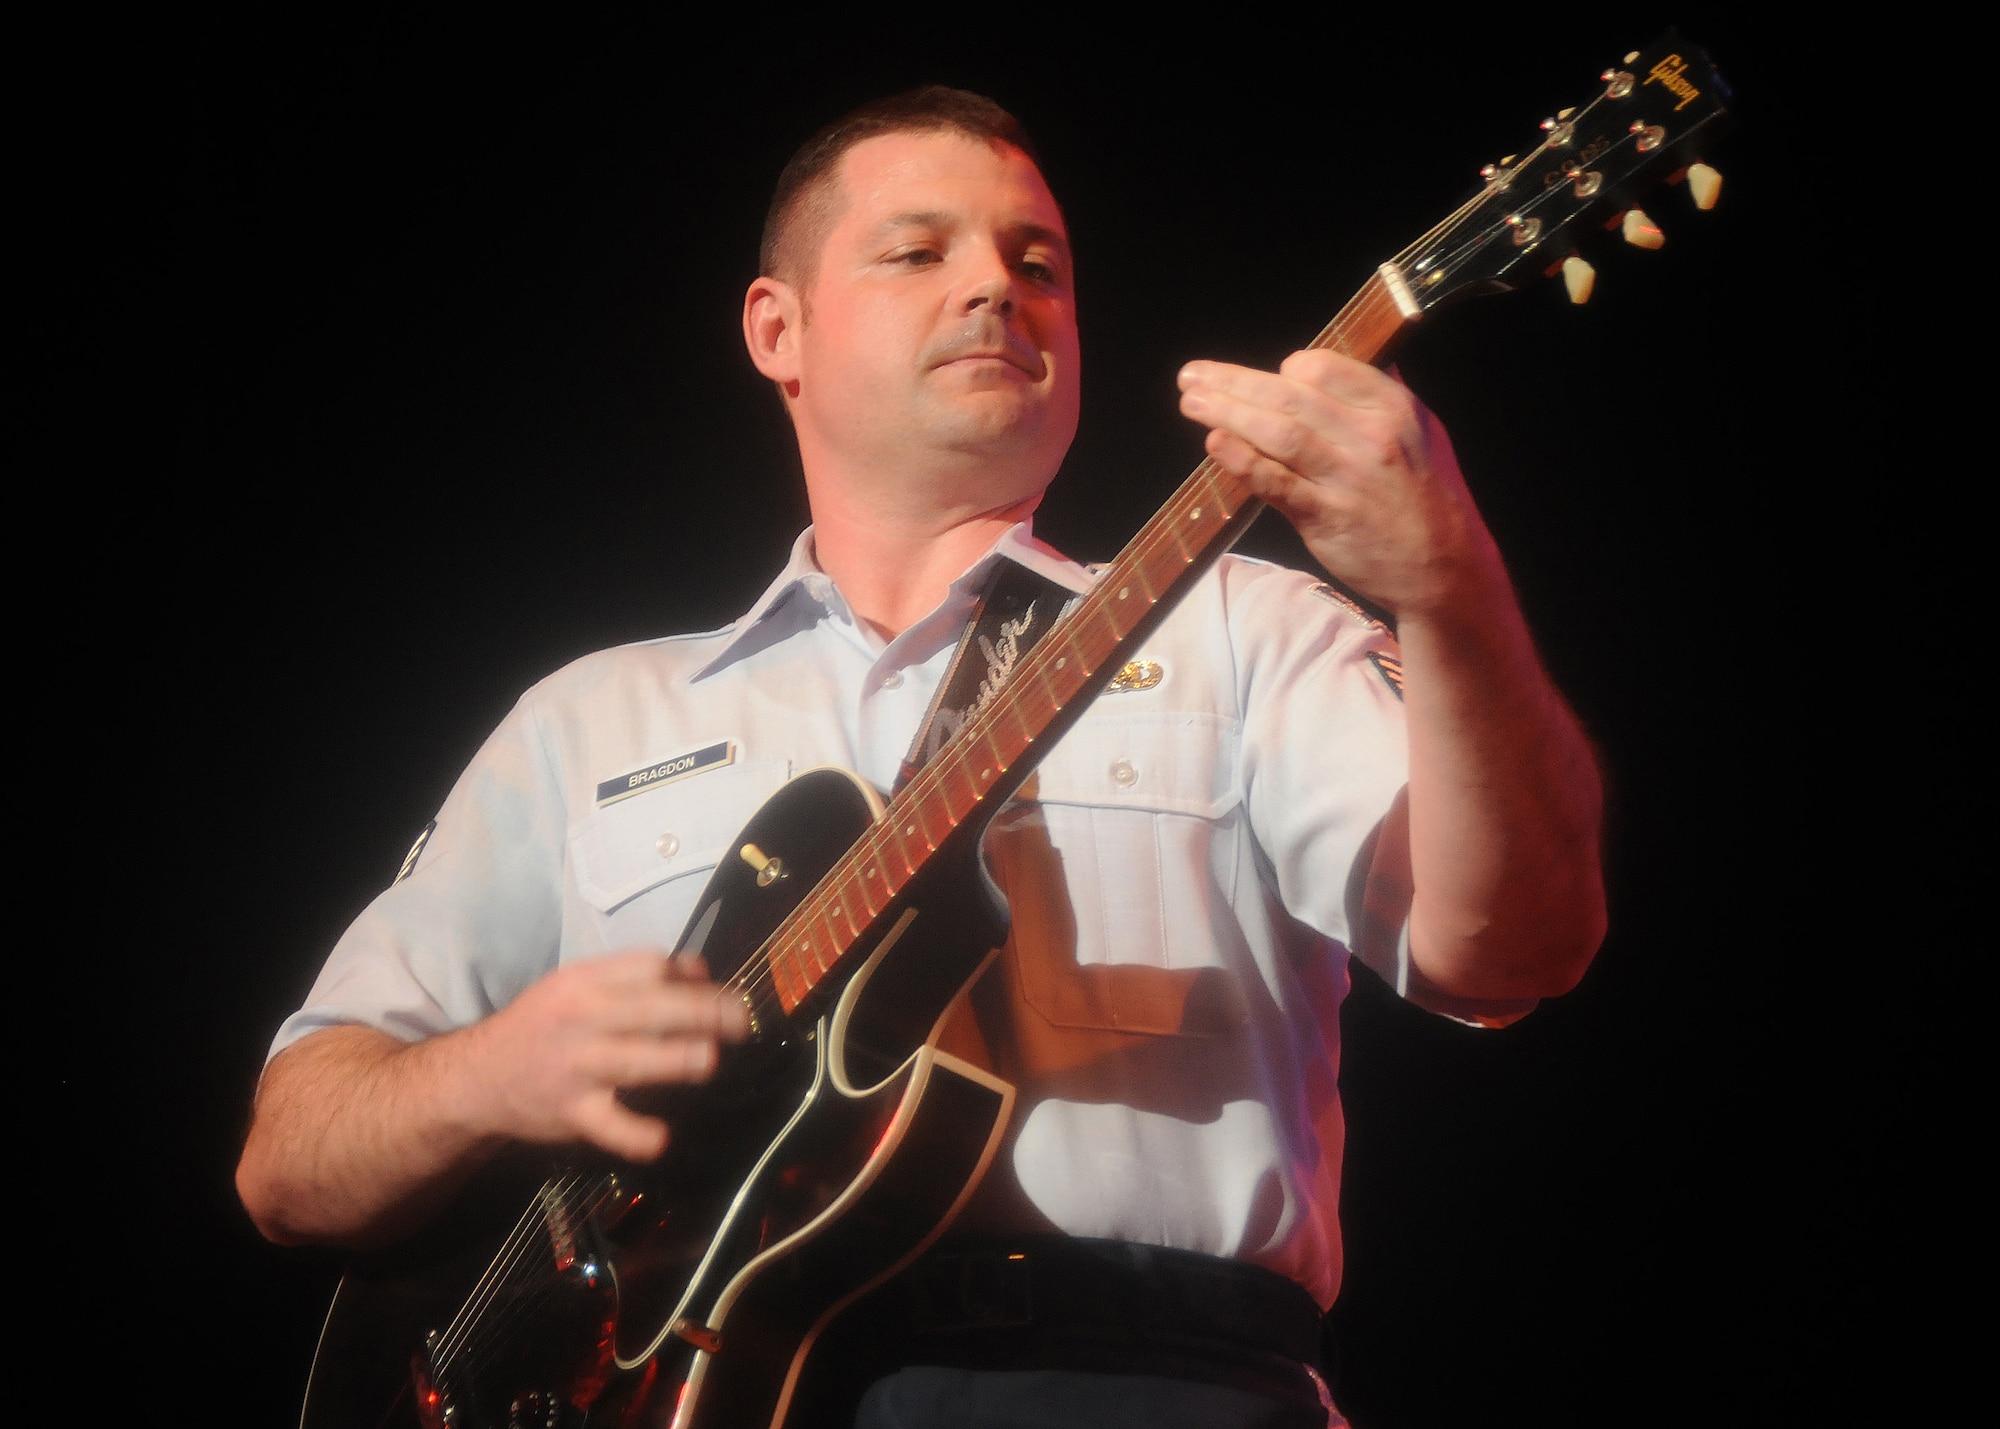 FUSSA CITY, Japan -- Staff Sgt. Daniel Bragdon, U.S. Air Force Band of the Pacific-Asia "Pacific Trends" guitarist, performs a solo March 15 during the Japan-U.S. Joint Concert, "Music Across the Border." The concert took place at Fussa Citizens' Hall and around 850 Japanese and American guests attended the concert. (U.S. Air Force photo/Airman Sean Martin)